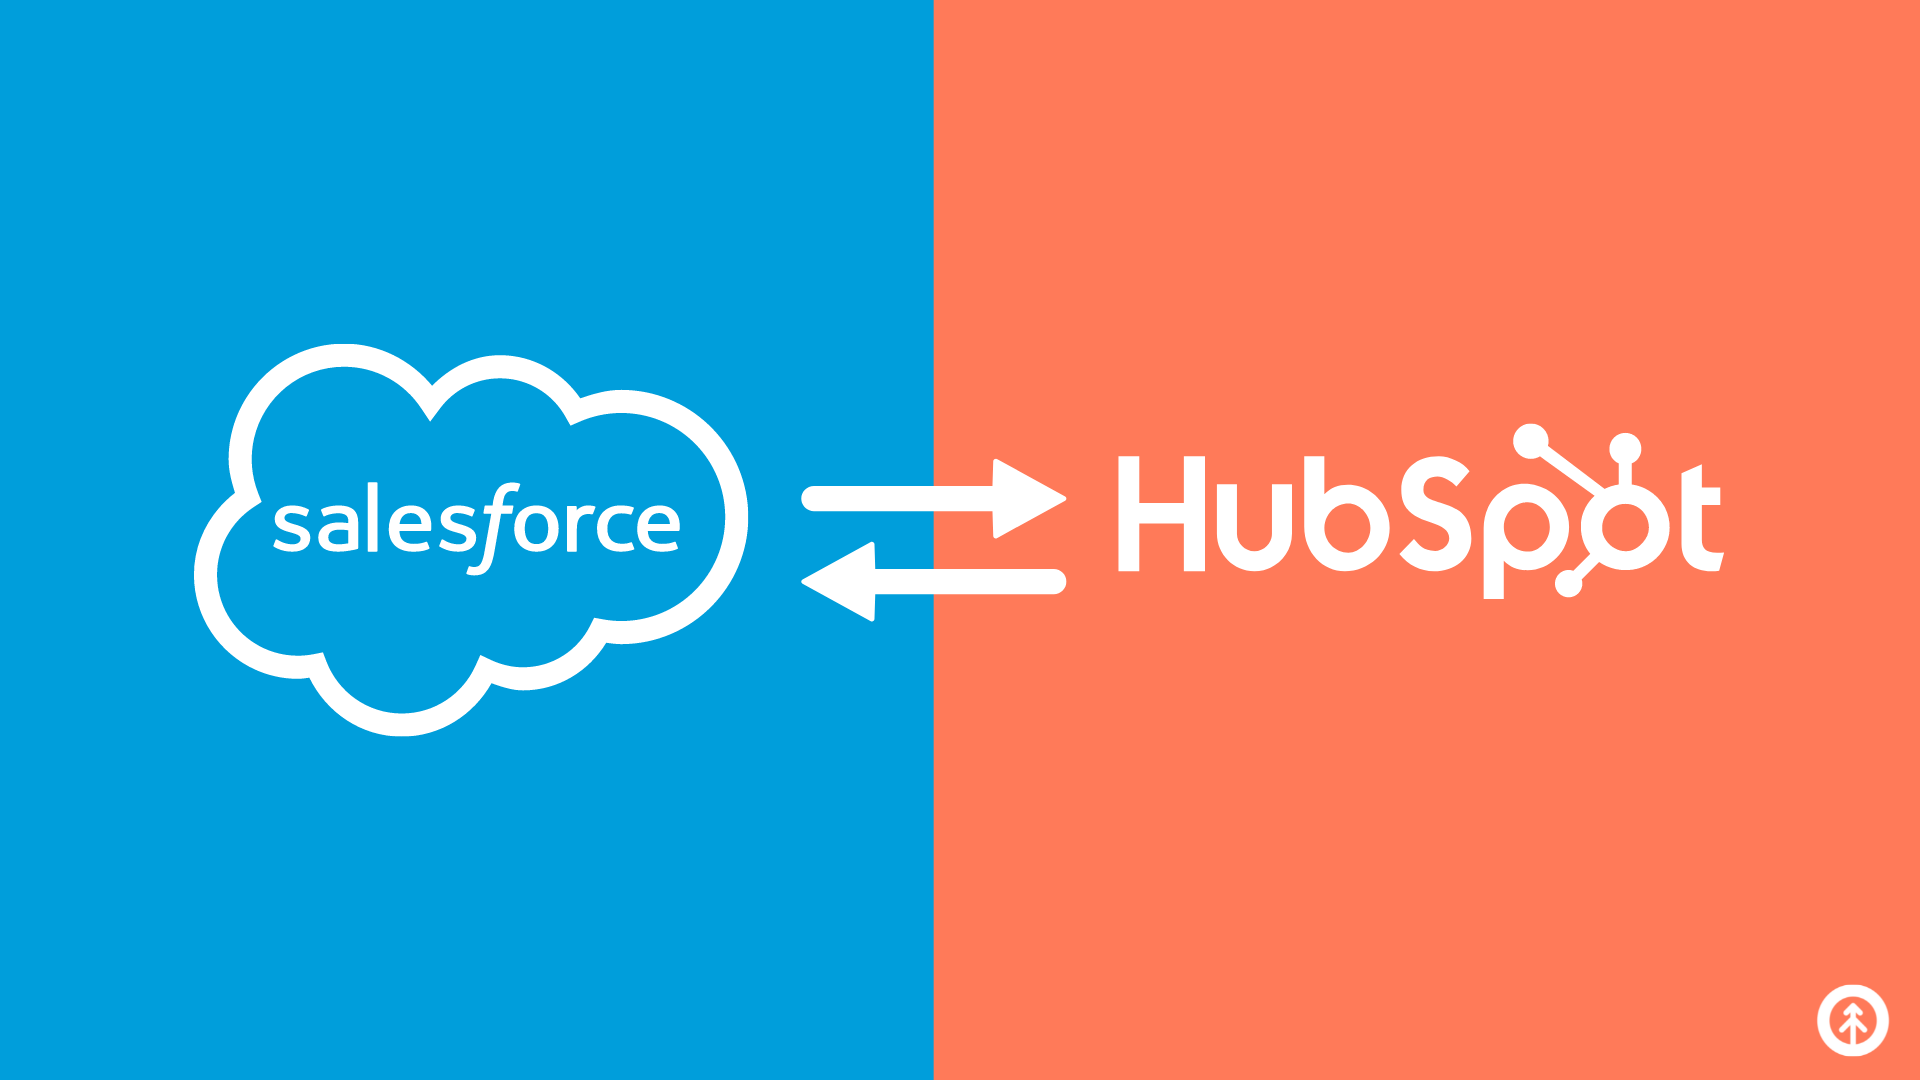 The logos “Salesforce” and “HubSpot” in their branded colors with arrows going back and forth between them to indicate the idea of easy integration. 